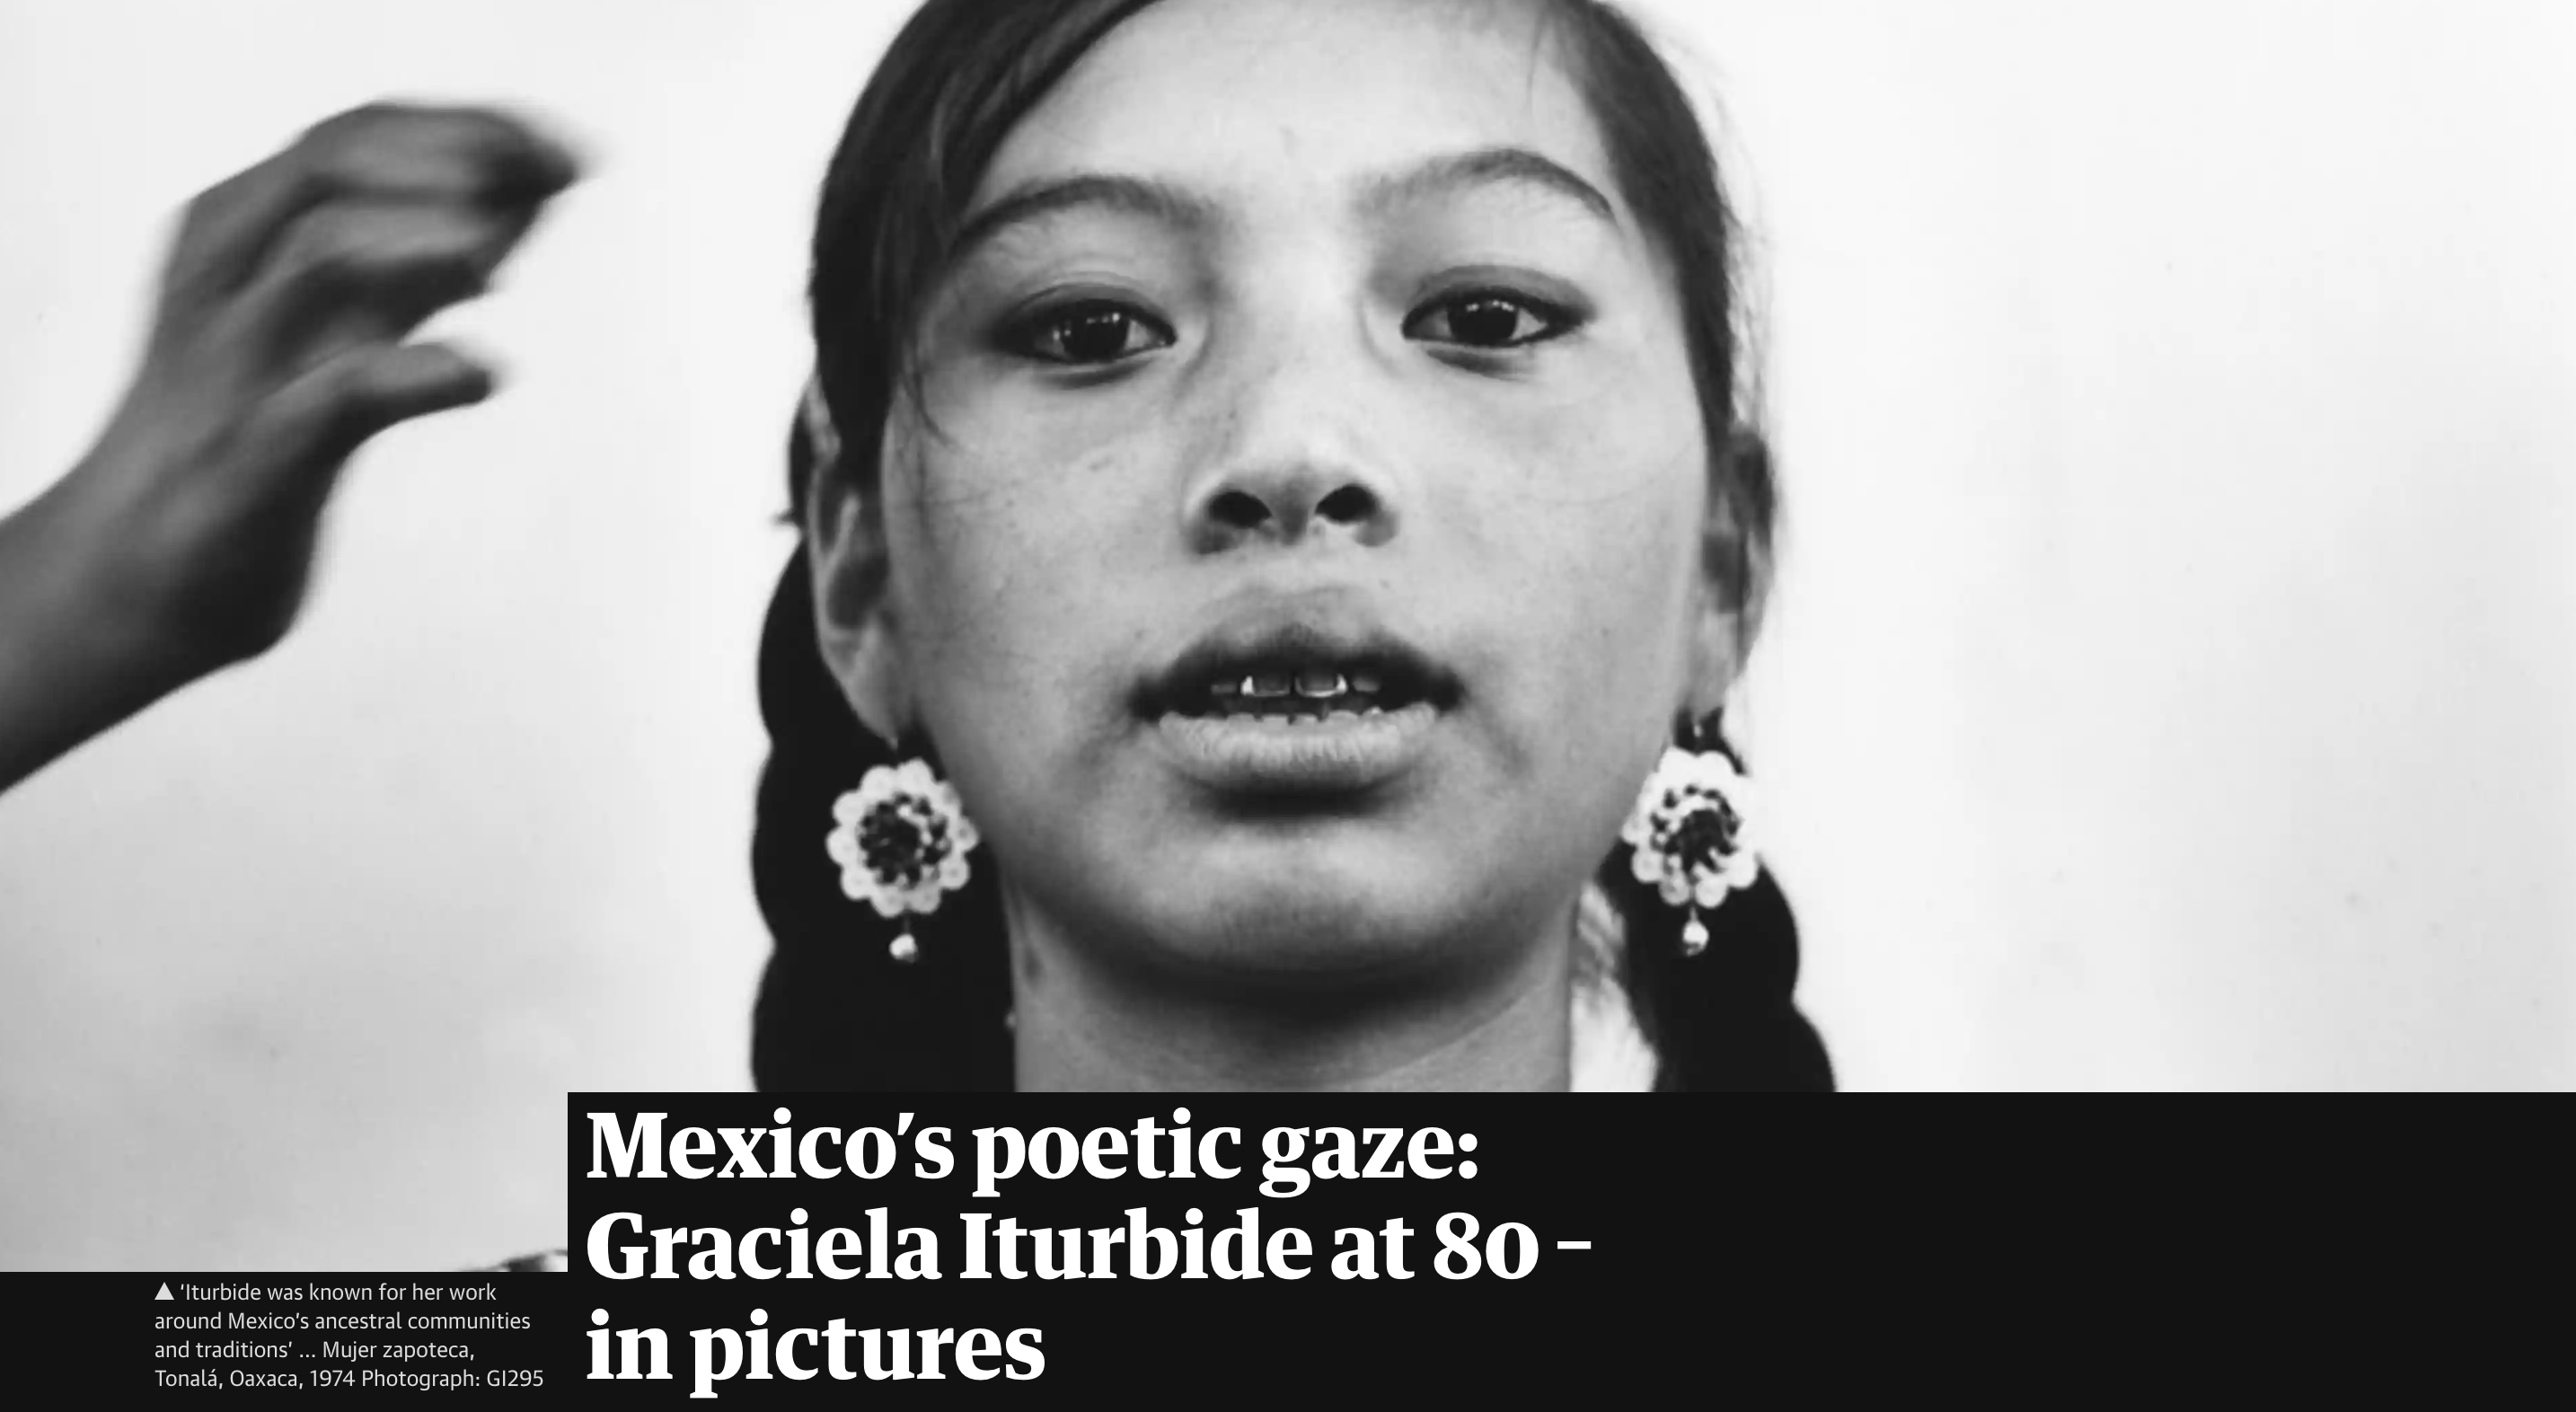 We recommend: Mexico’s poetic gaze: Graciela Iturbide at 80 – in pictures (The Guardian)